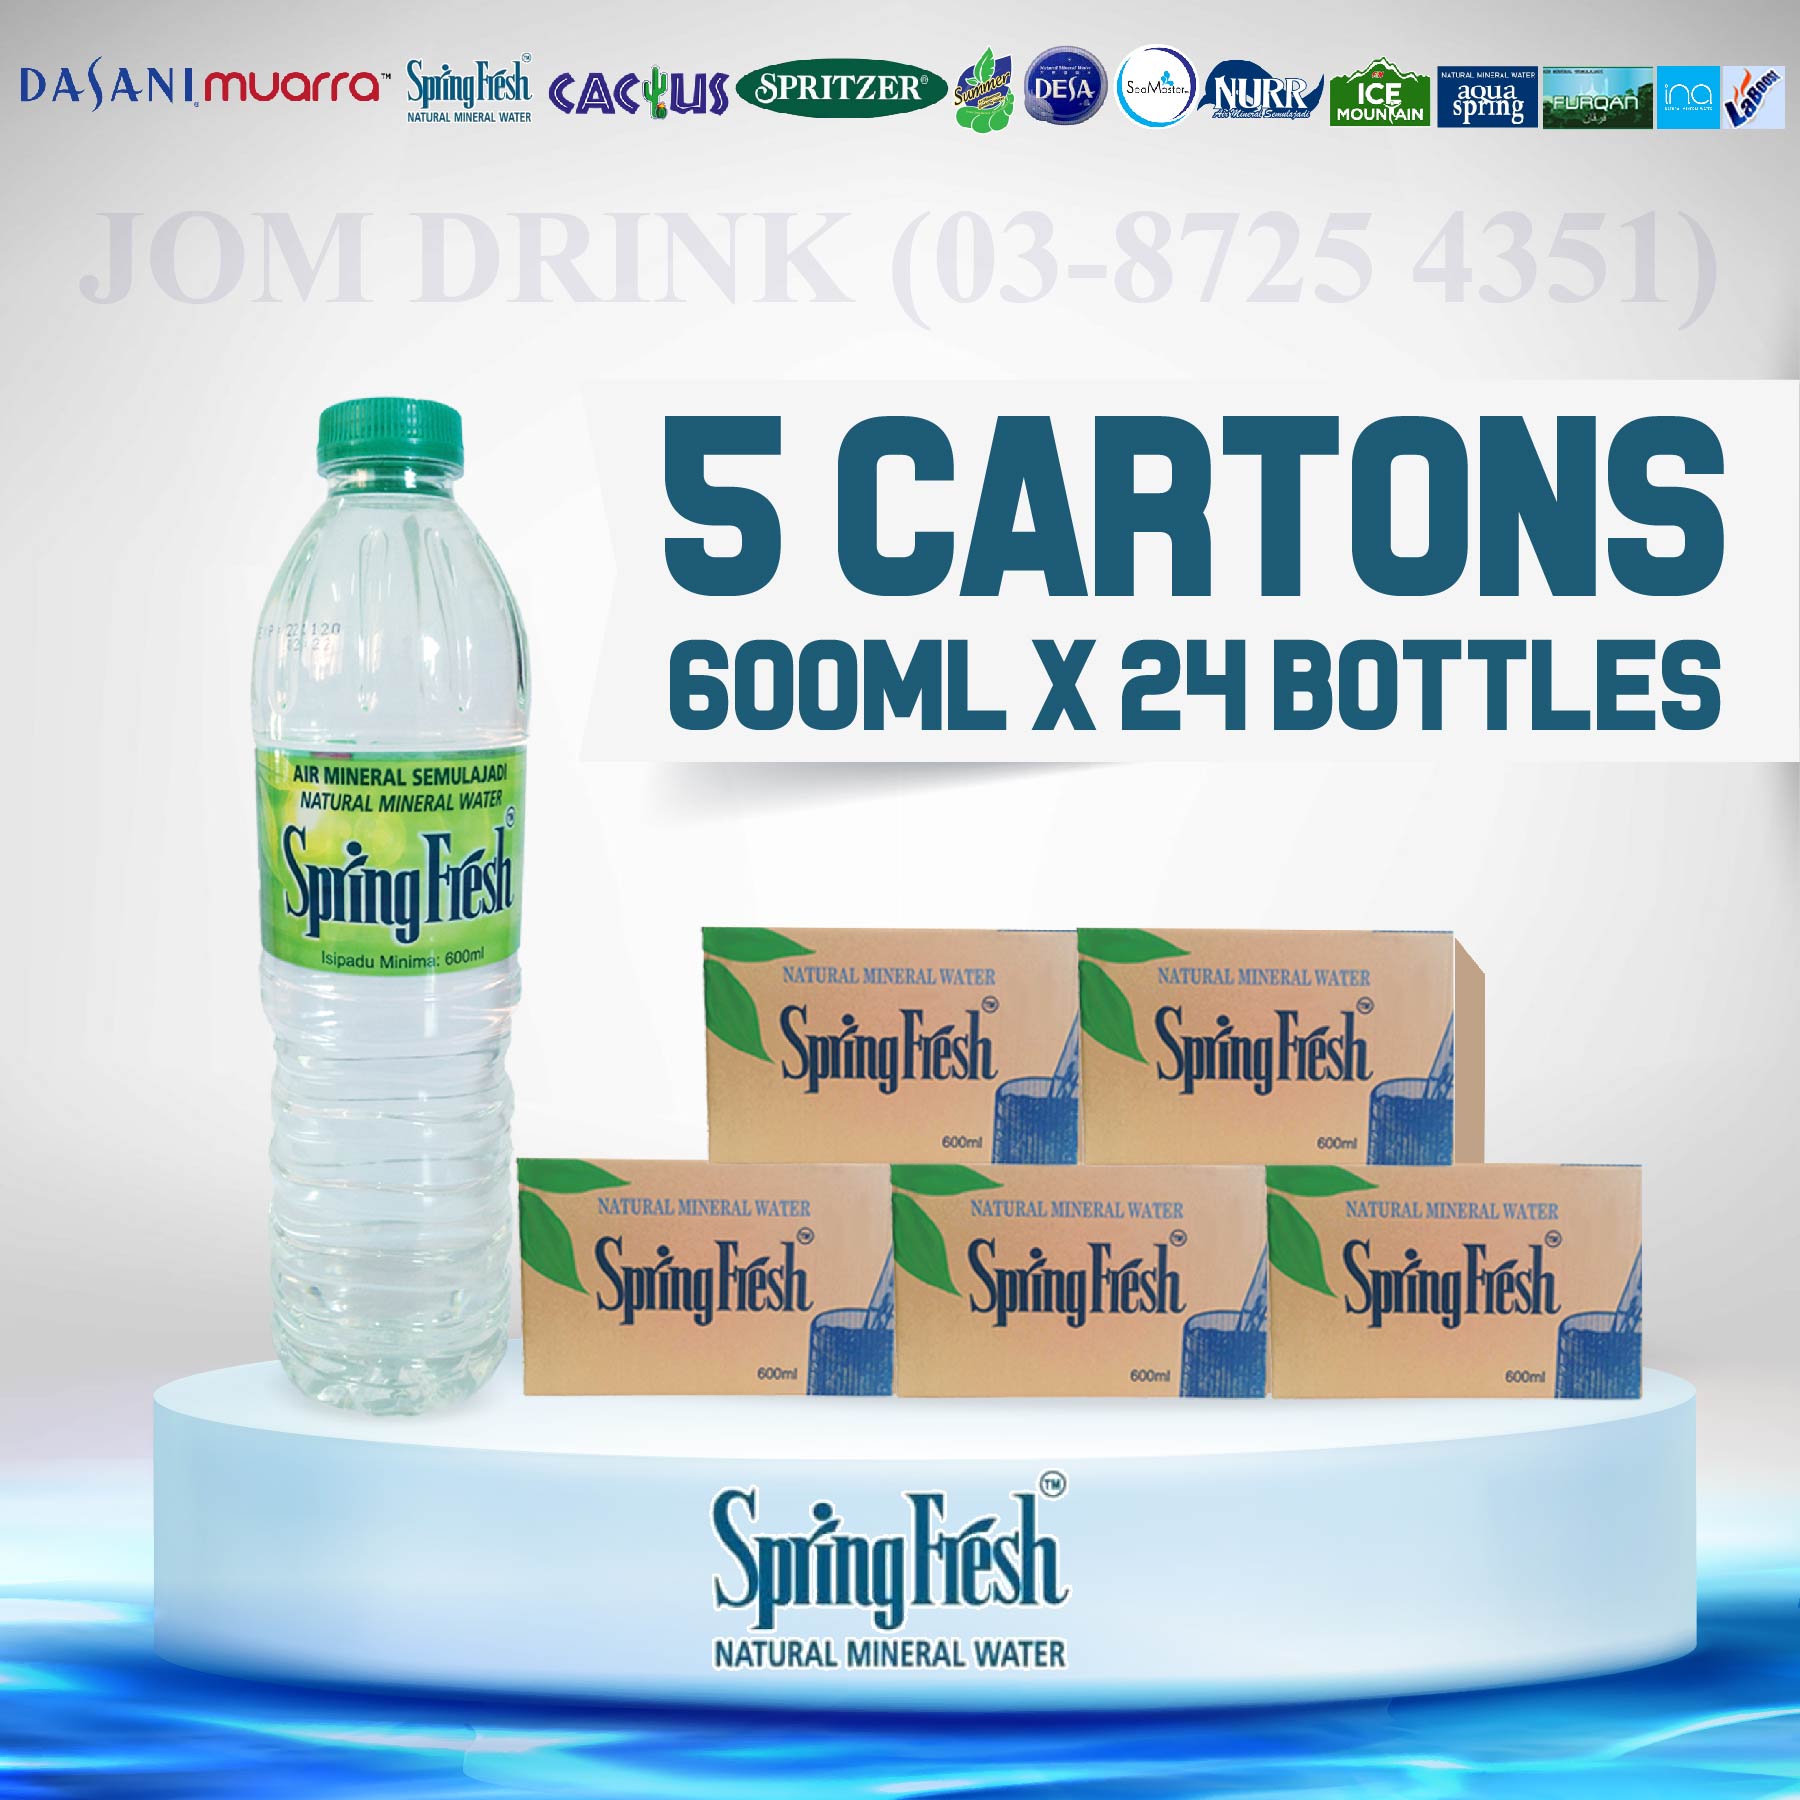 PACKAGES OF 5 BOXES : SPRINGFRESH MINERAL WATER 600ML